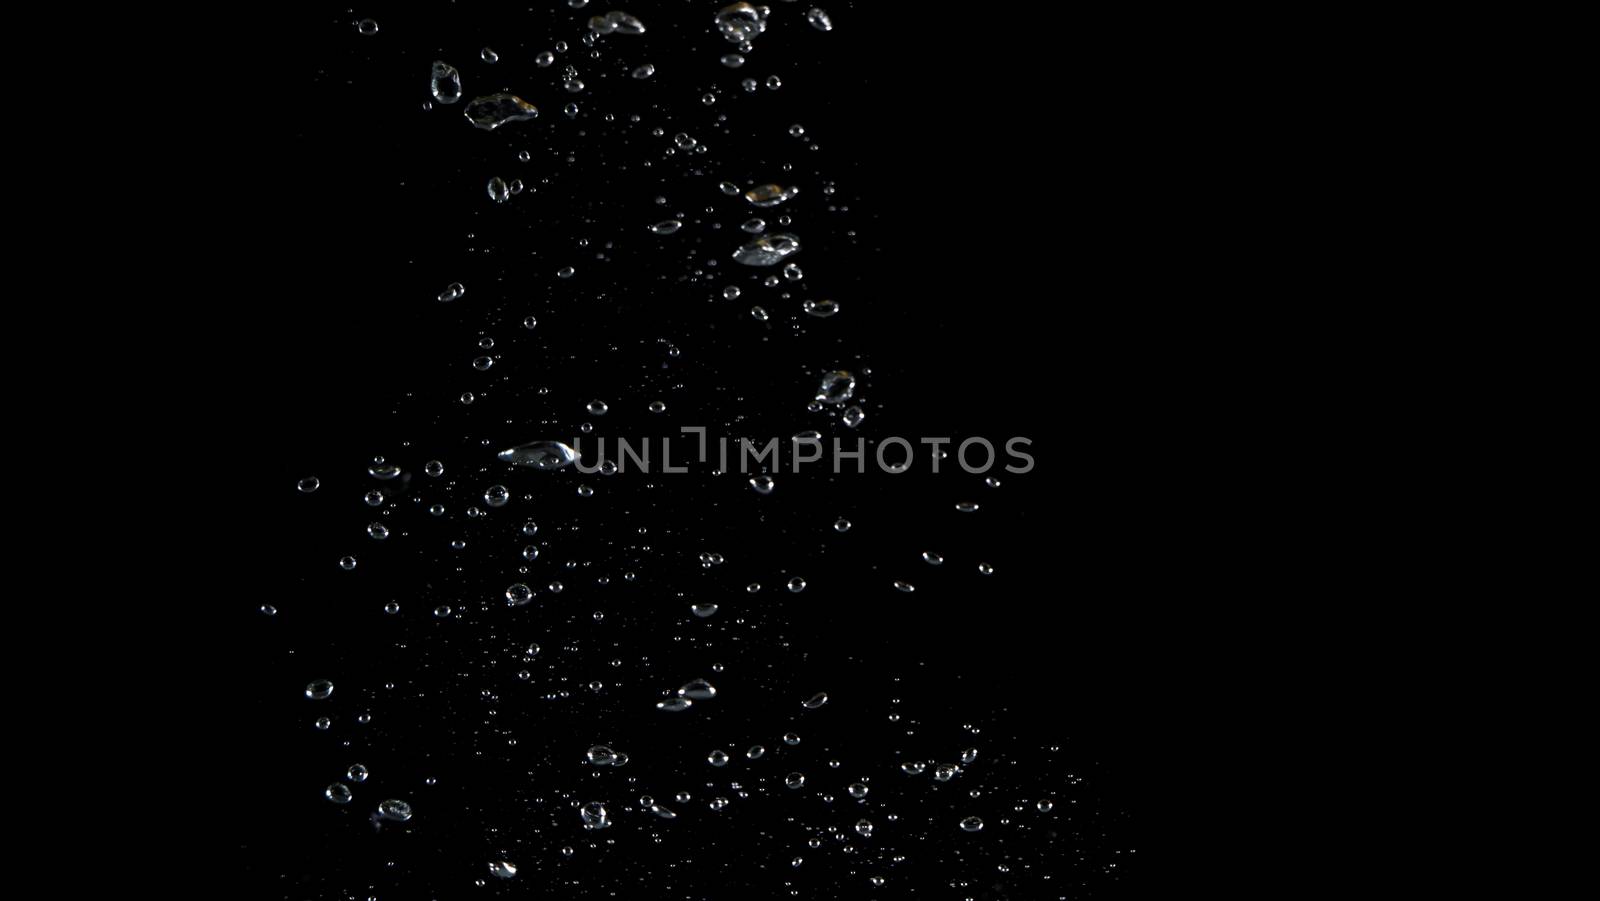 Extream close-up images of water bubbles or soda or liquid texture that splashing and floating up to surface like a explosion in black color background for refreshing carbonate drink concept.